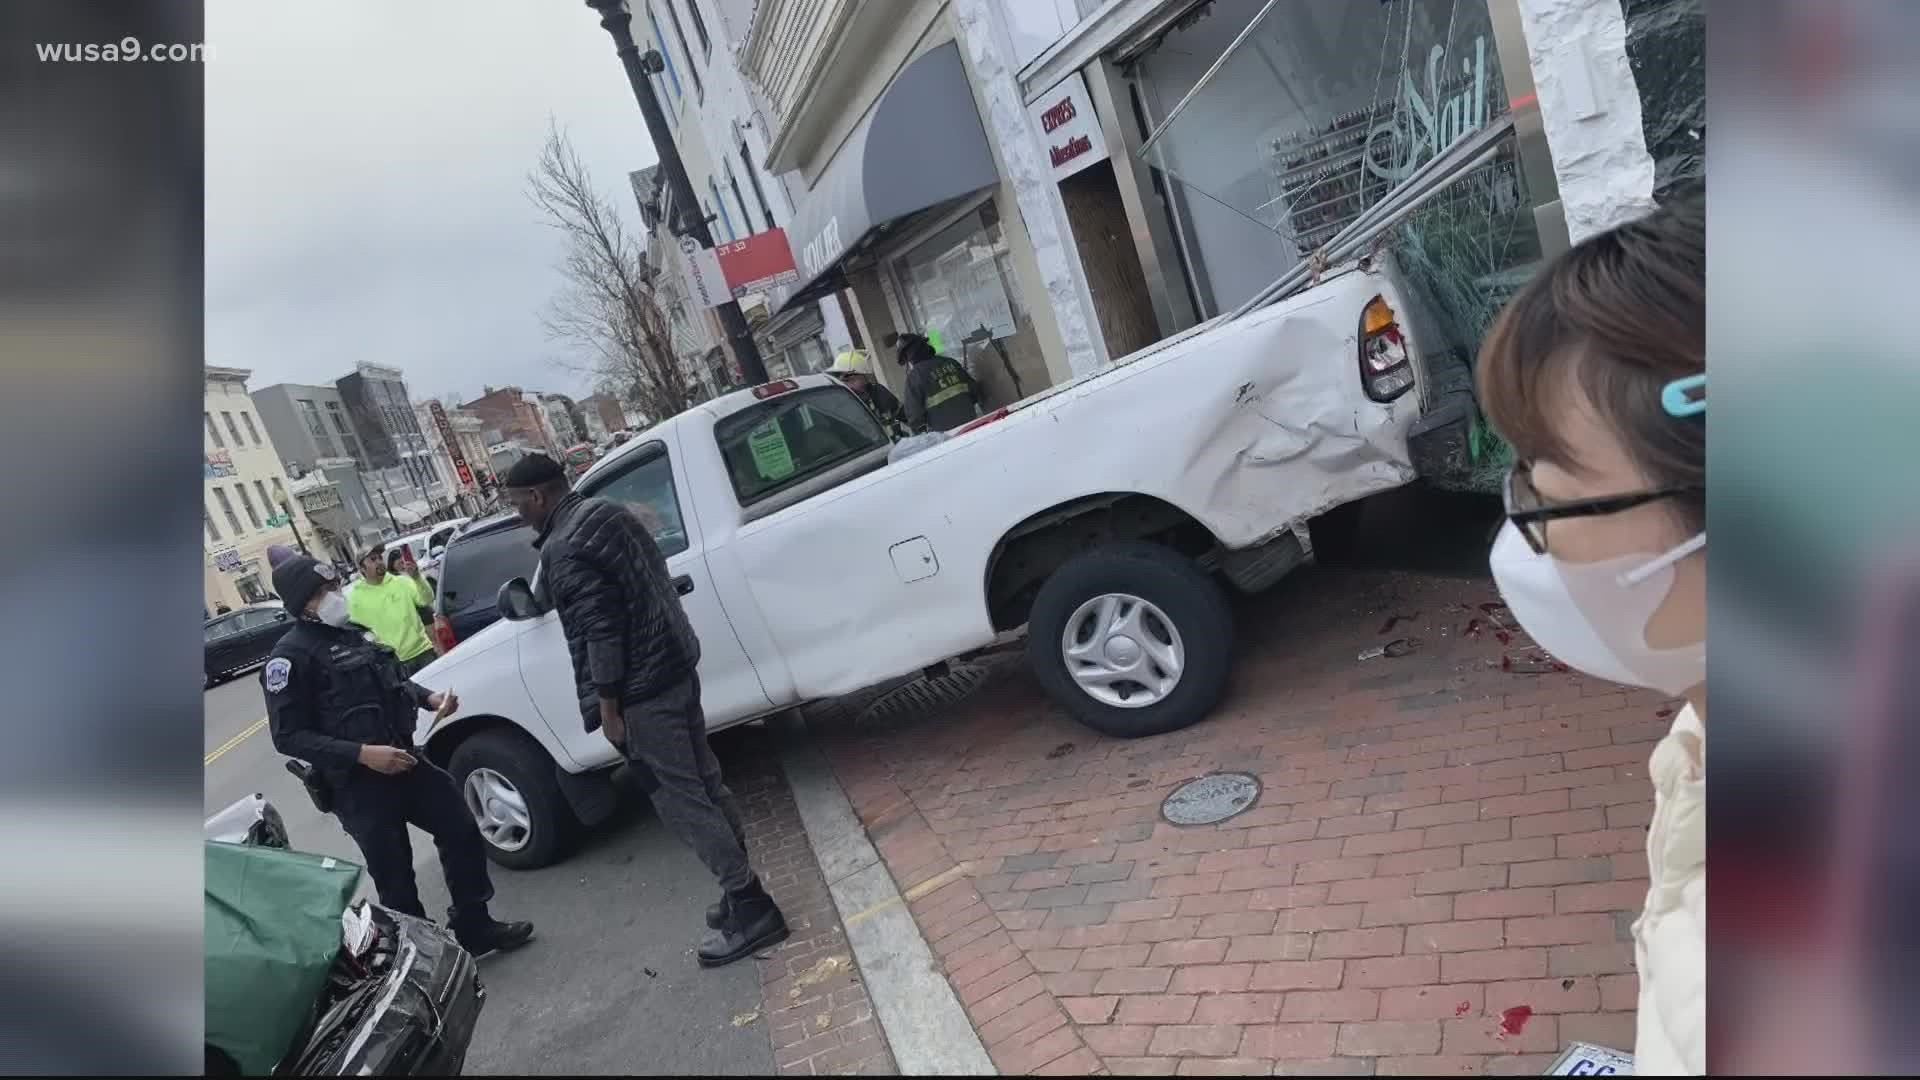 DC Police said no injuries following Wisconsin Avenue crash in Northwest.